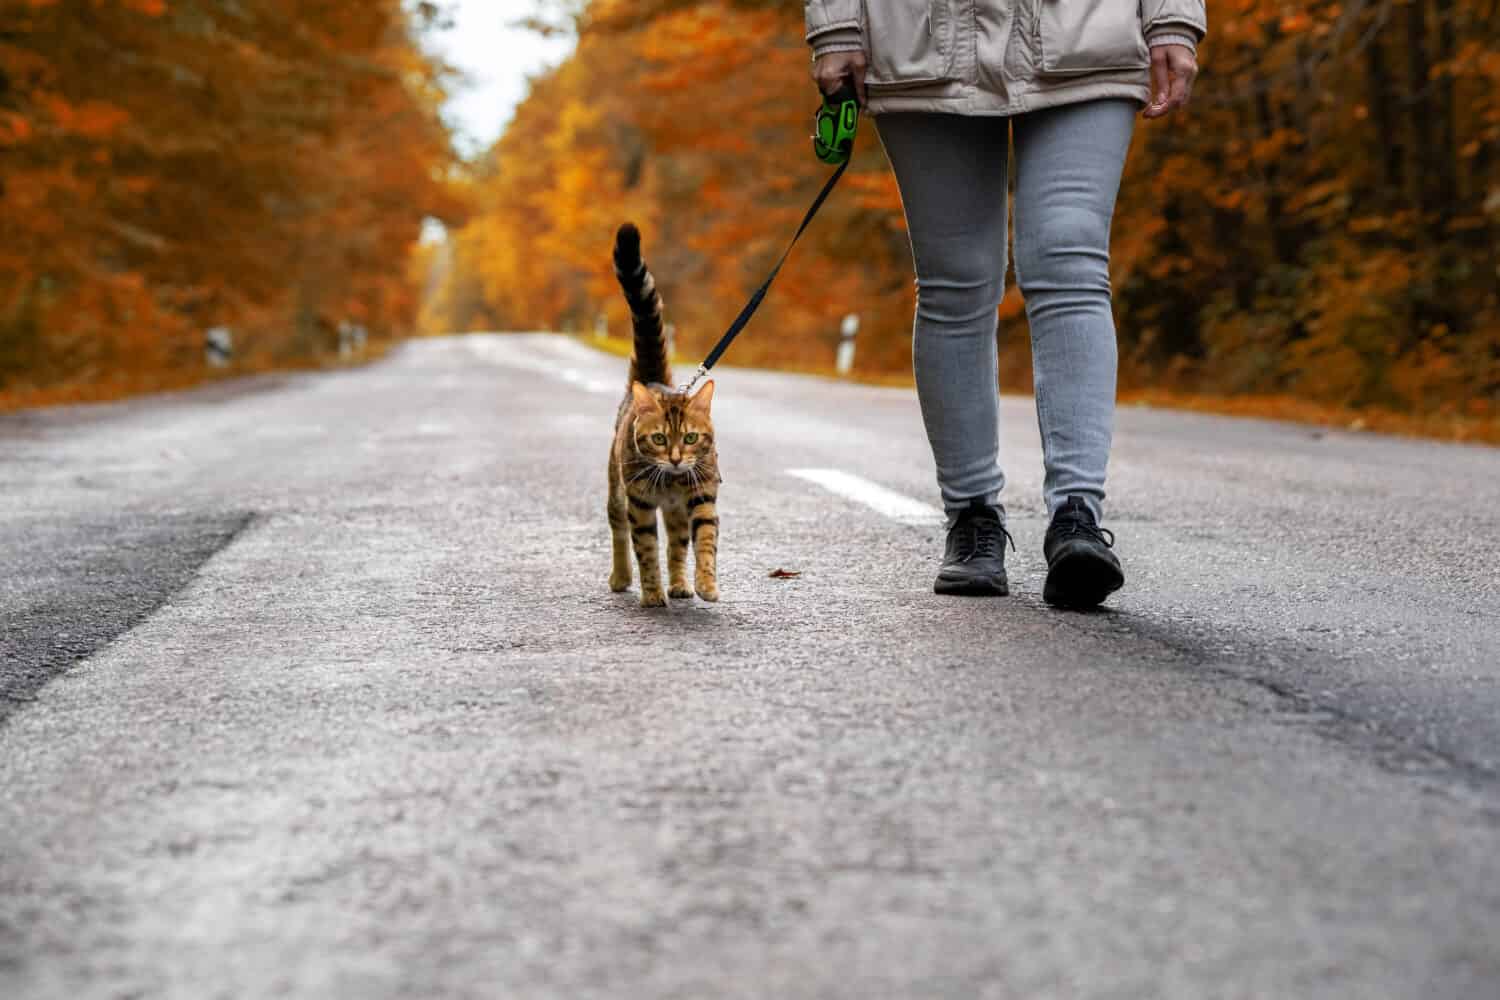 <p>Cats don’t need to be taken outdoors for walks. They potty in litterboxes and can live fantastic lives indoors with daily play as their exercise.</p>    <p>But you can harness-train a cat if you want to. It takes time and patience, but it’s very similar to training a stubborn dog.</p>